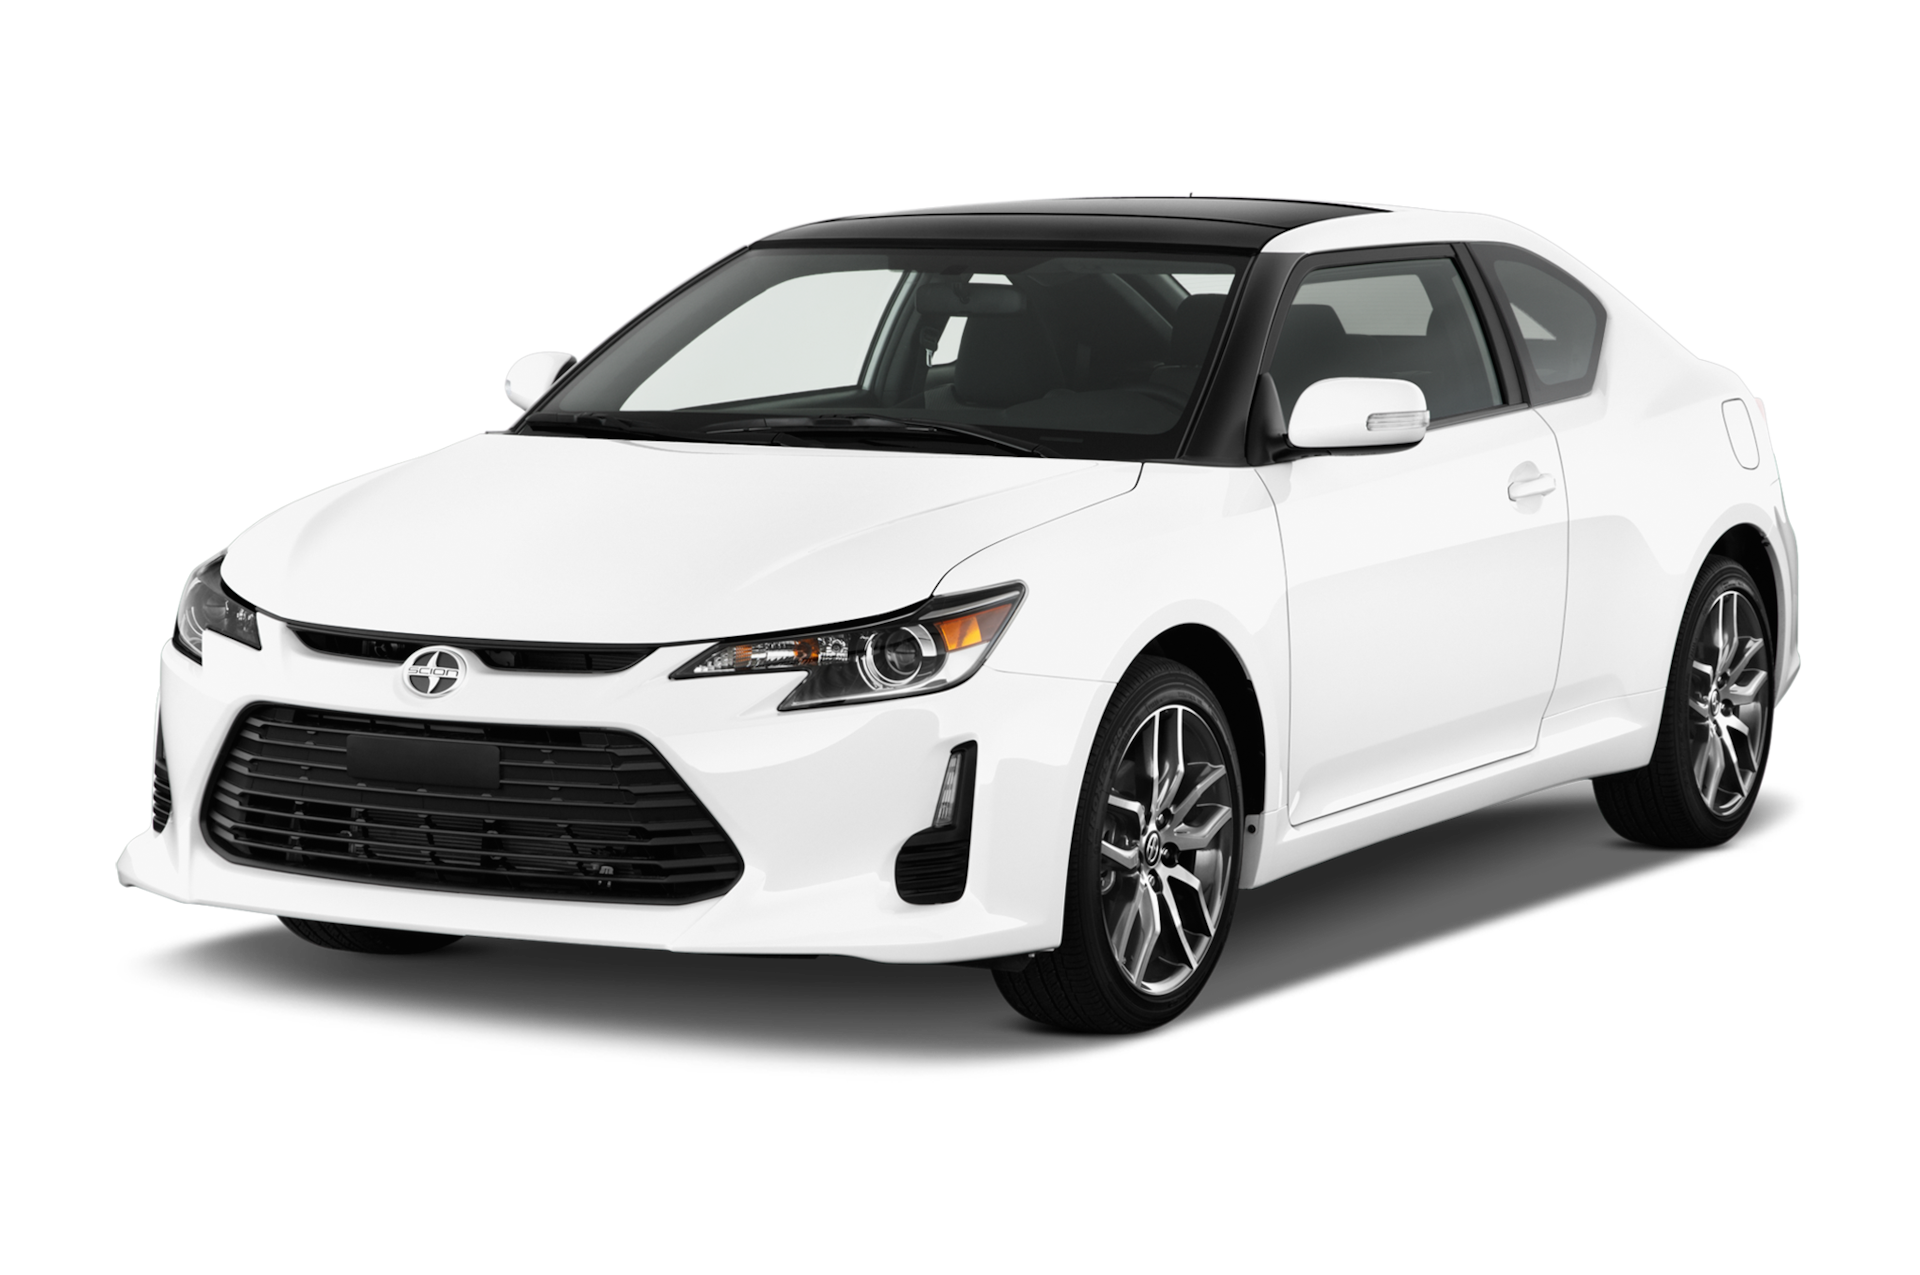 2016 Scion TC Prices, Reviews, and Photos - MotorTrend